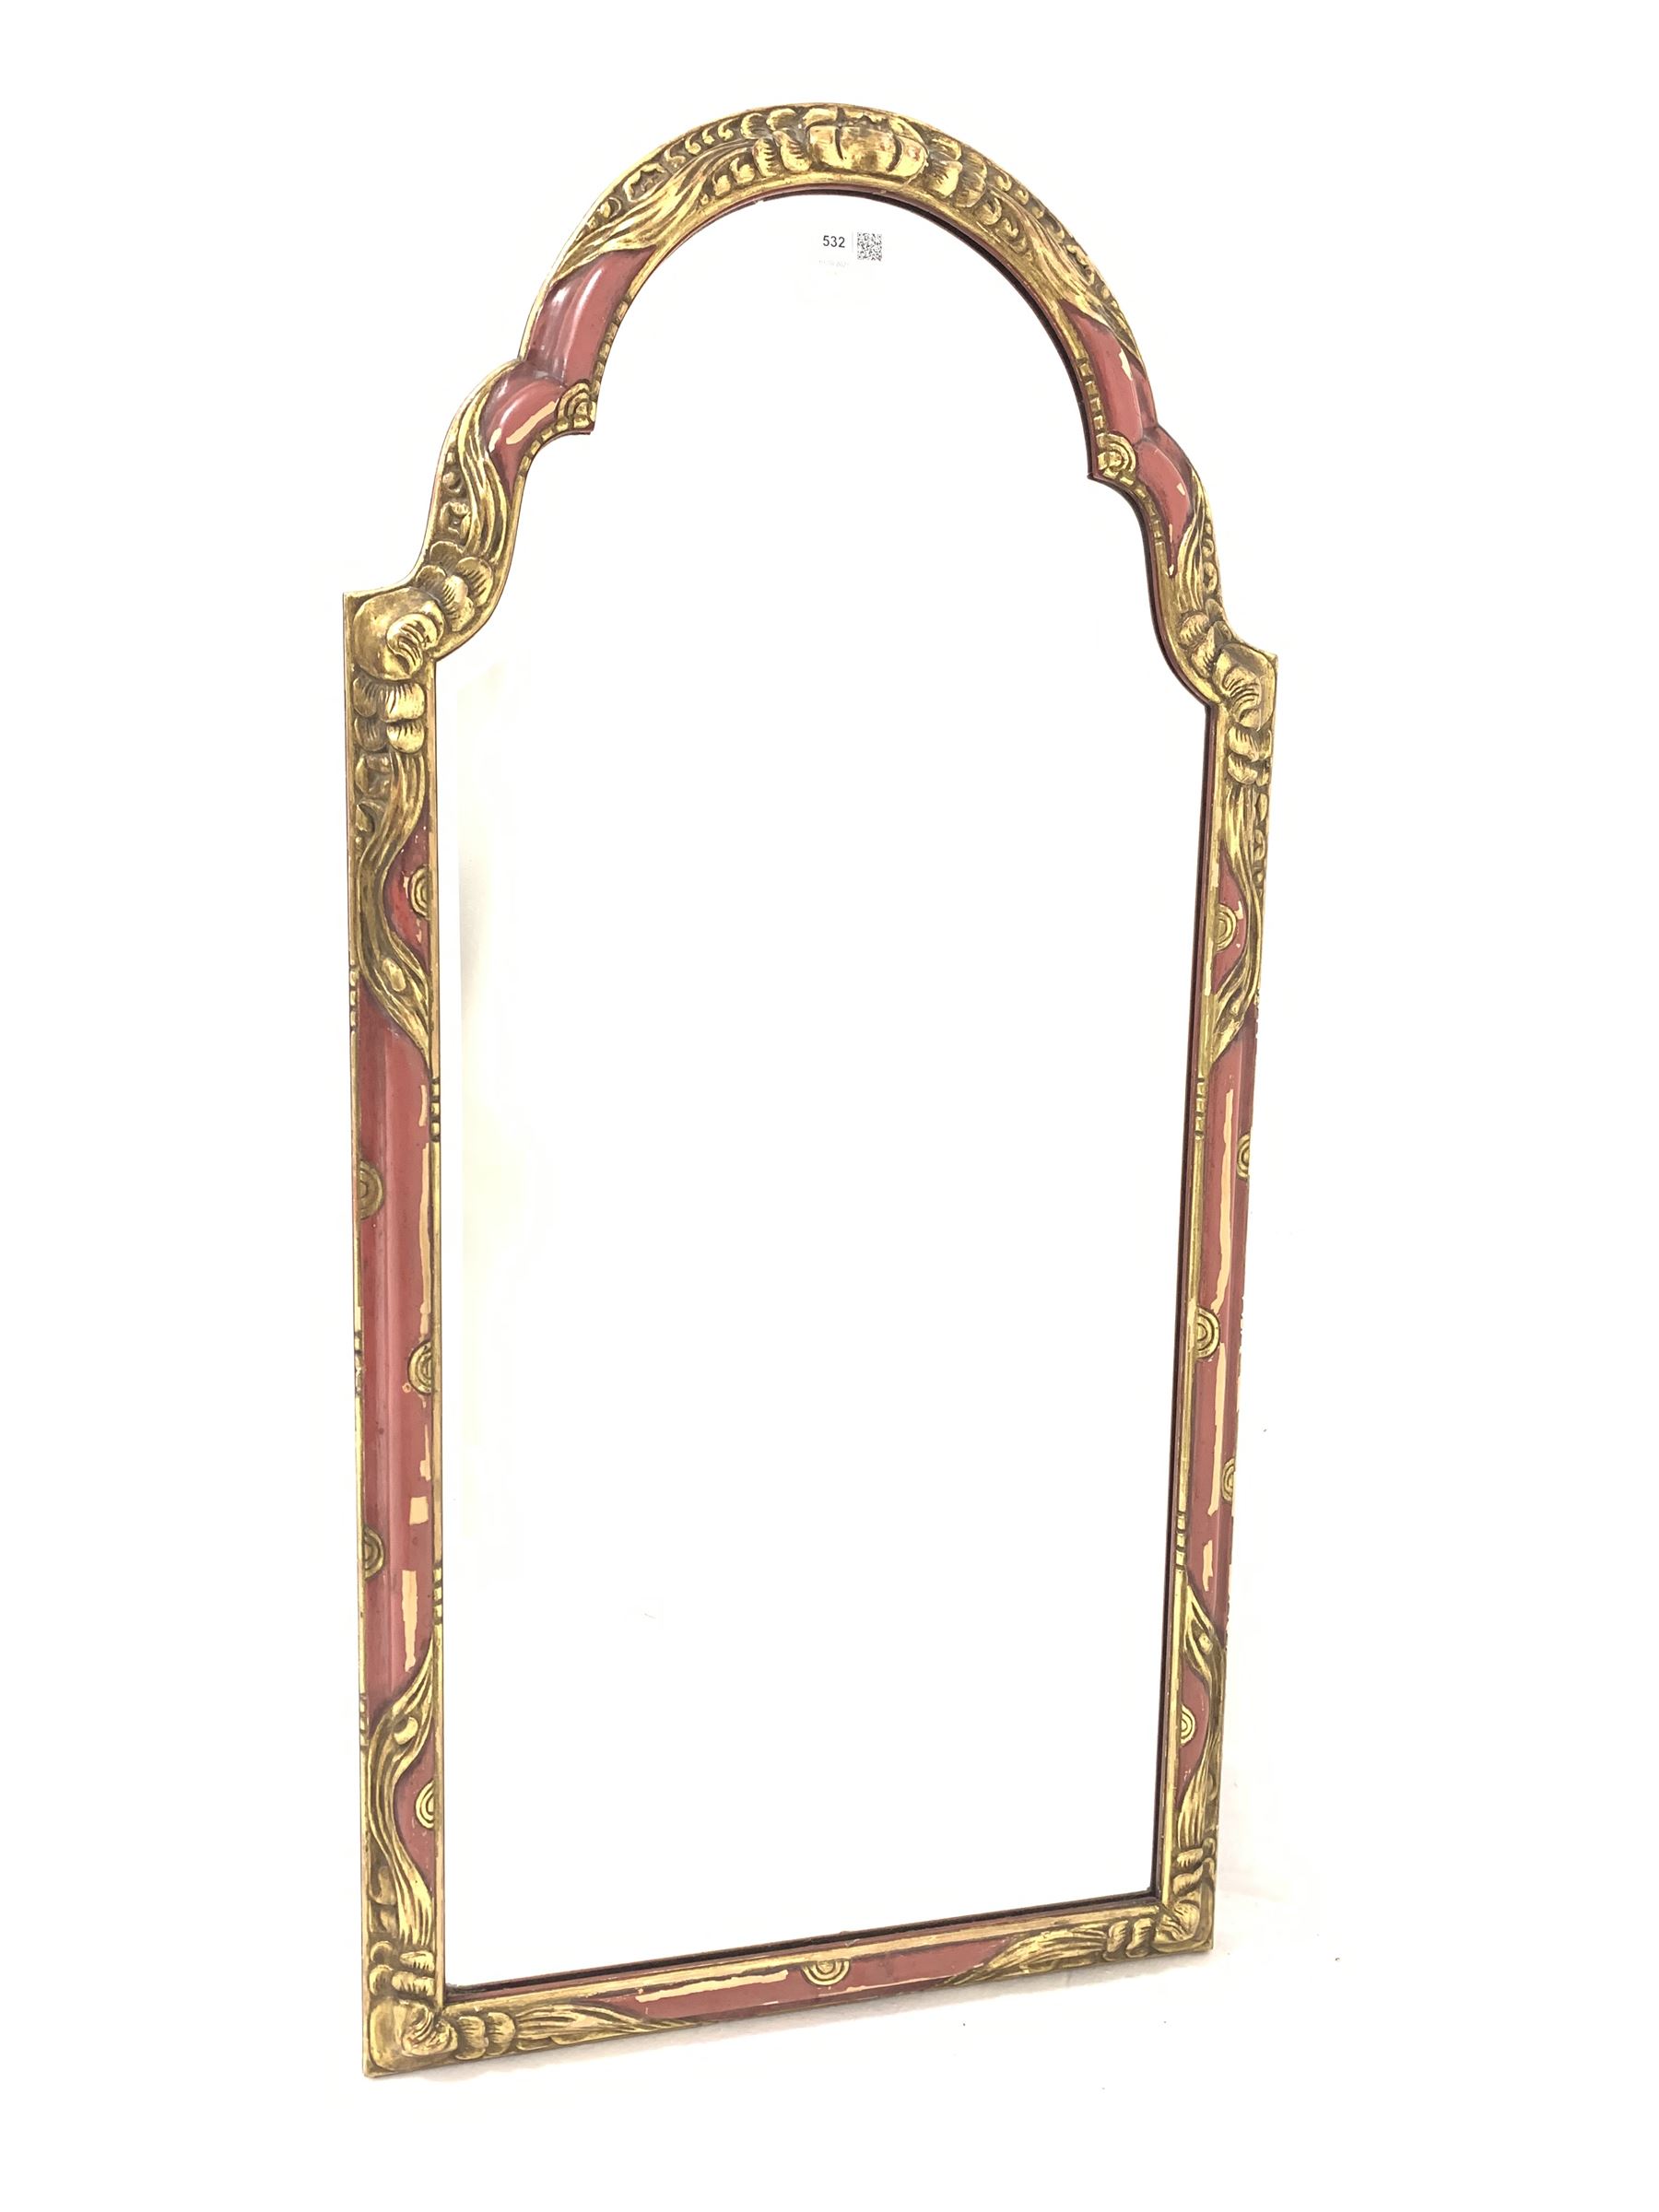 Late 18th century design parcel gilt upright wall mirror